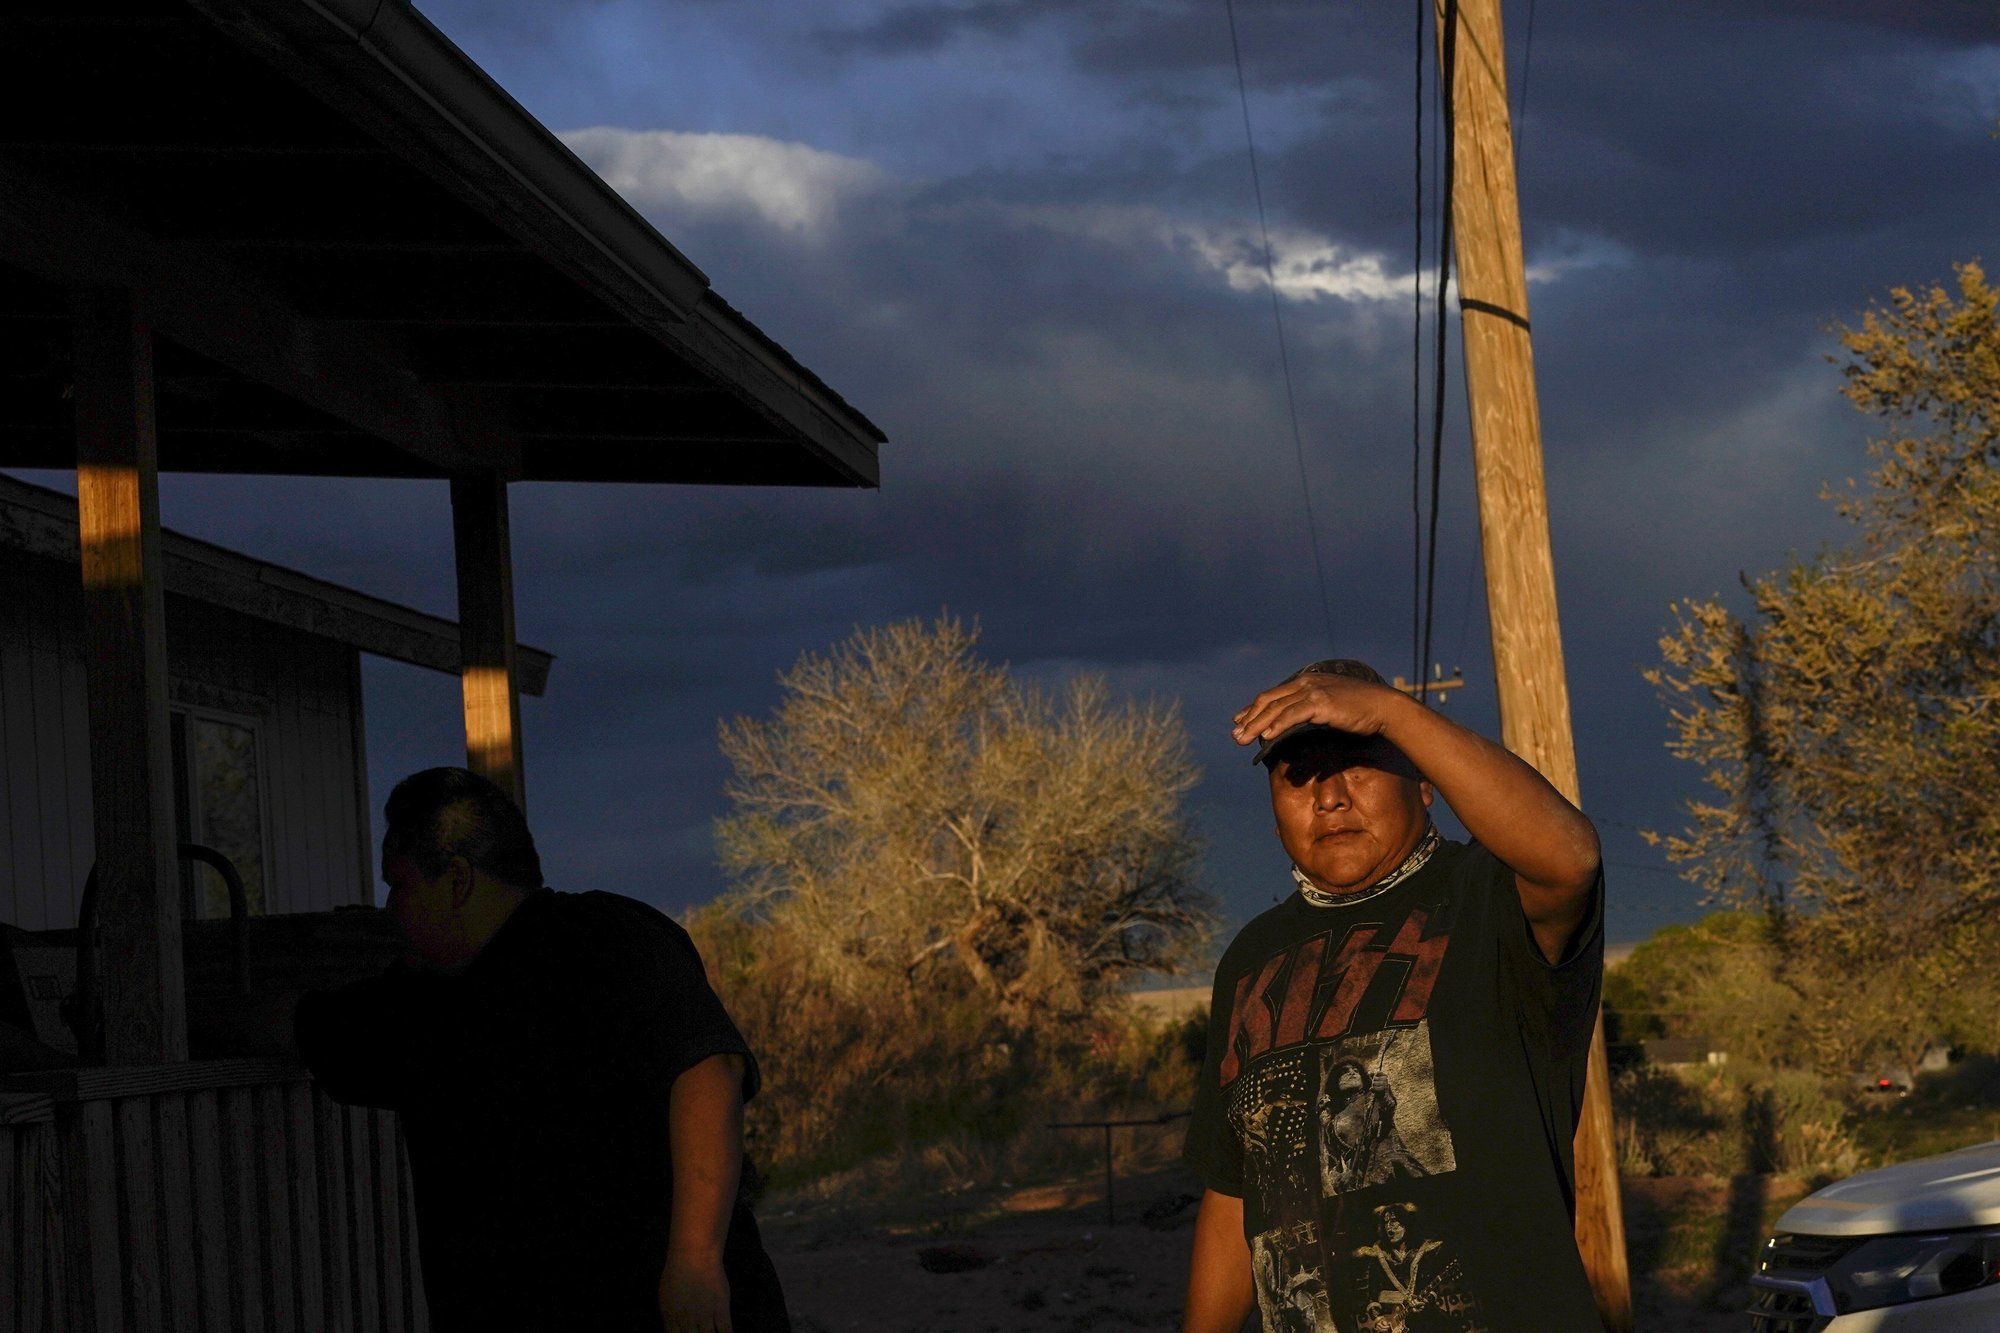 Eugene Dinehdeal shields his face from the setting sun on the Dinehdeal family compound in Tuba City, Ariz., on the Navajo reservation on April 20, 2020. The Navajo reservation has some of the highest rates of coronavirus in the country. Image by AP Photo/Carolyn Kaster. United States, 2020.